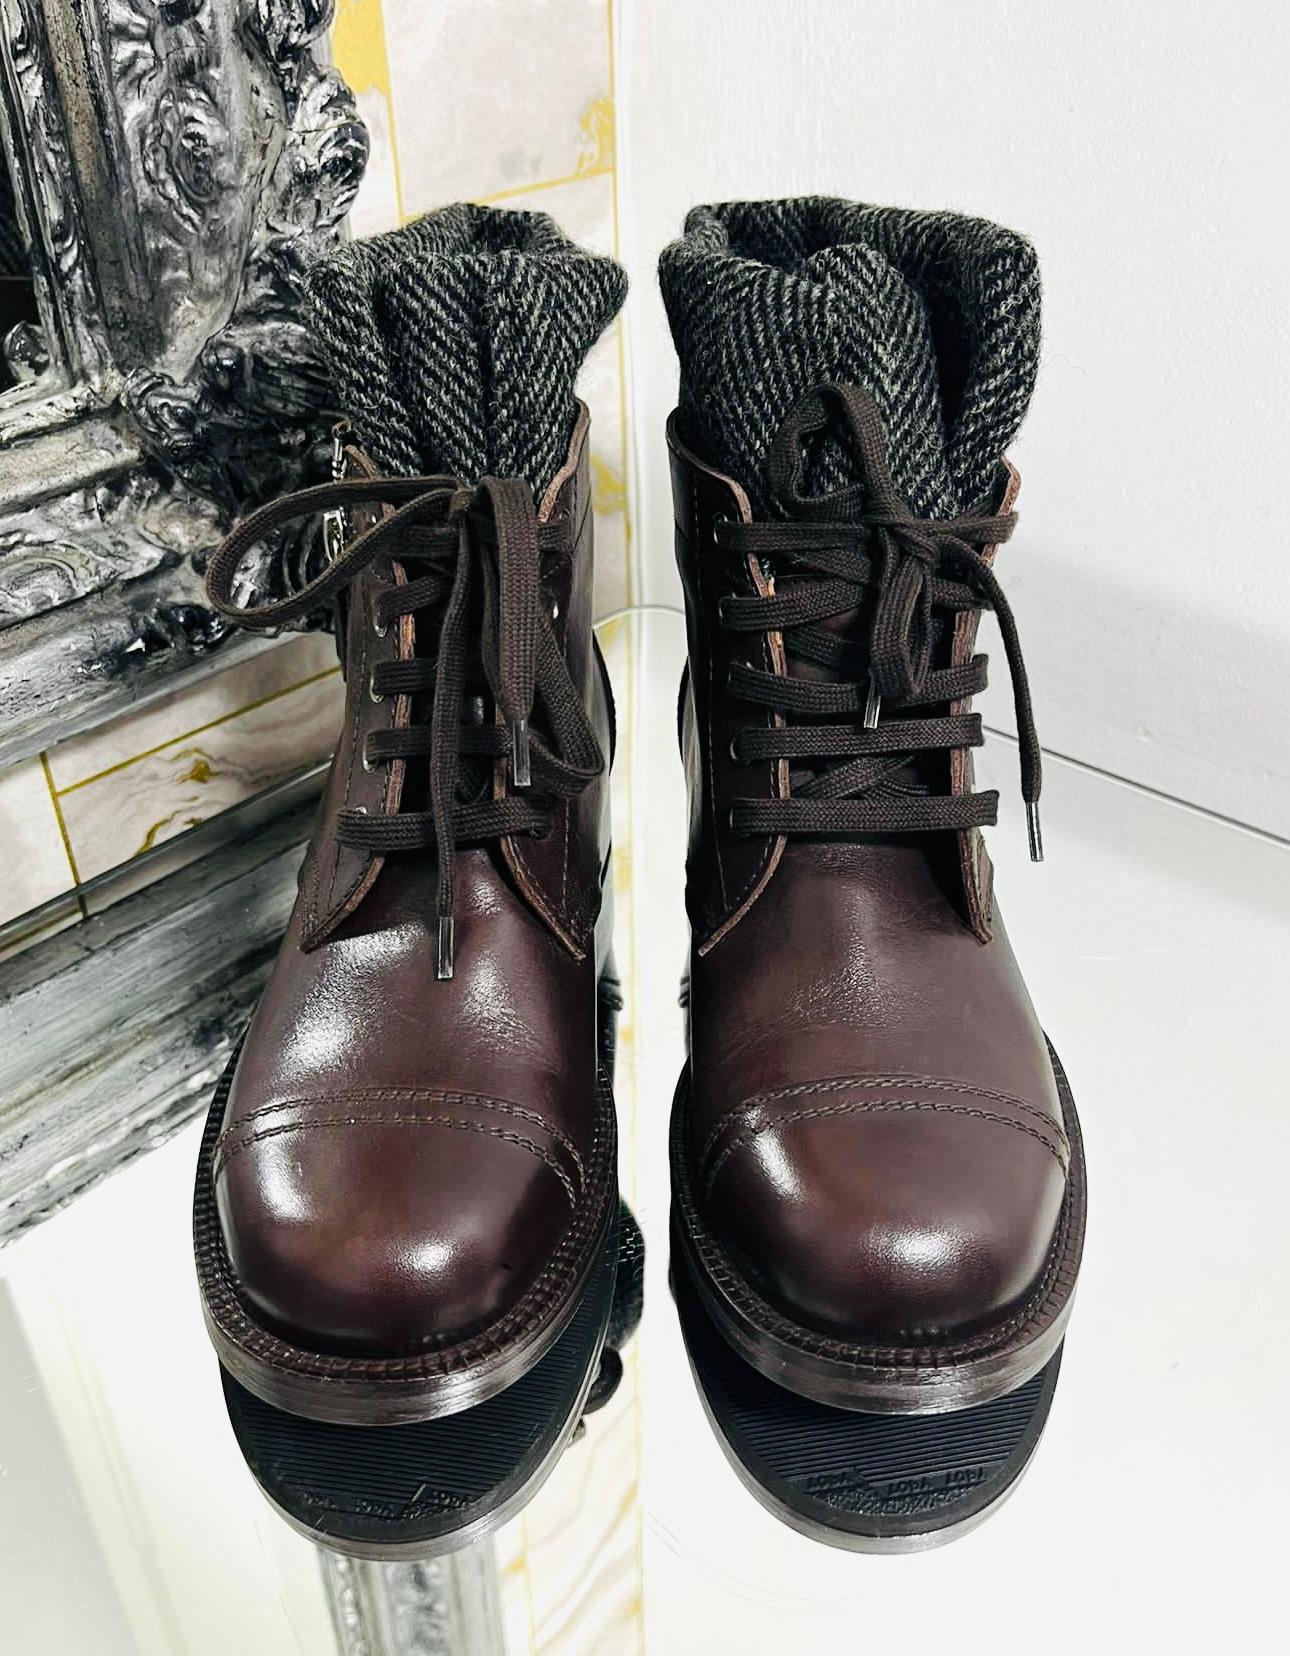 Chanel CC Logo Leather Ankle Boots

Deep brown, lace-up boots designed wit grey sock trim detailing.

Featuring 'CC' logo stitching  and zip fastening to the side.

Styled with round toe and short block heel, leather insoles.

Size – 37.5

Condition